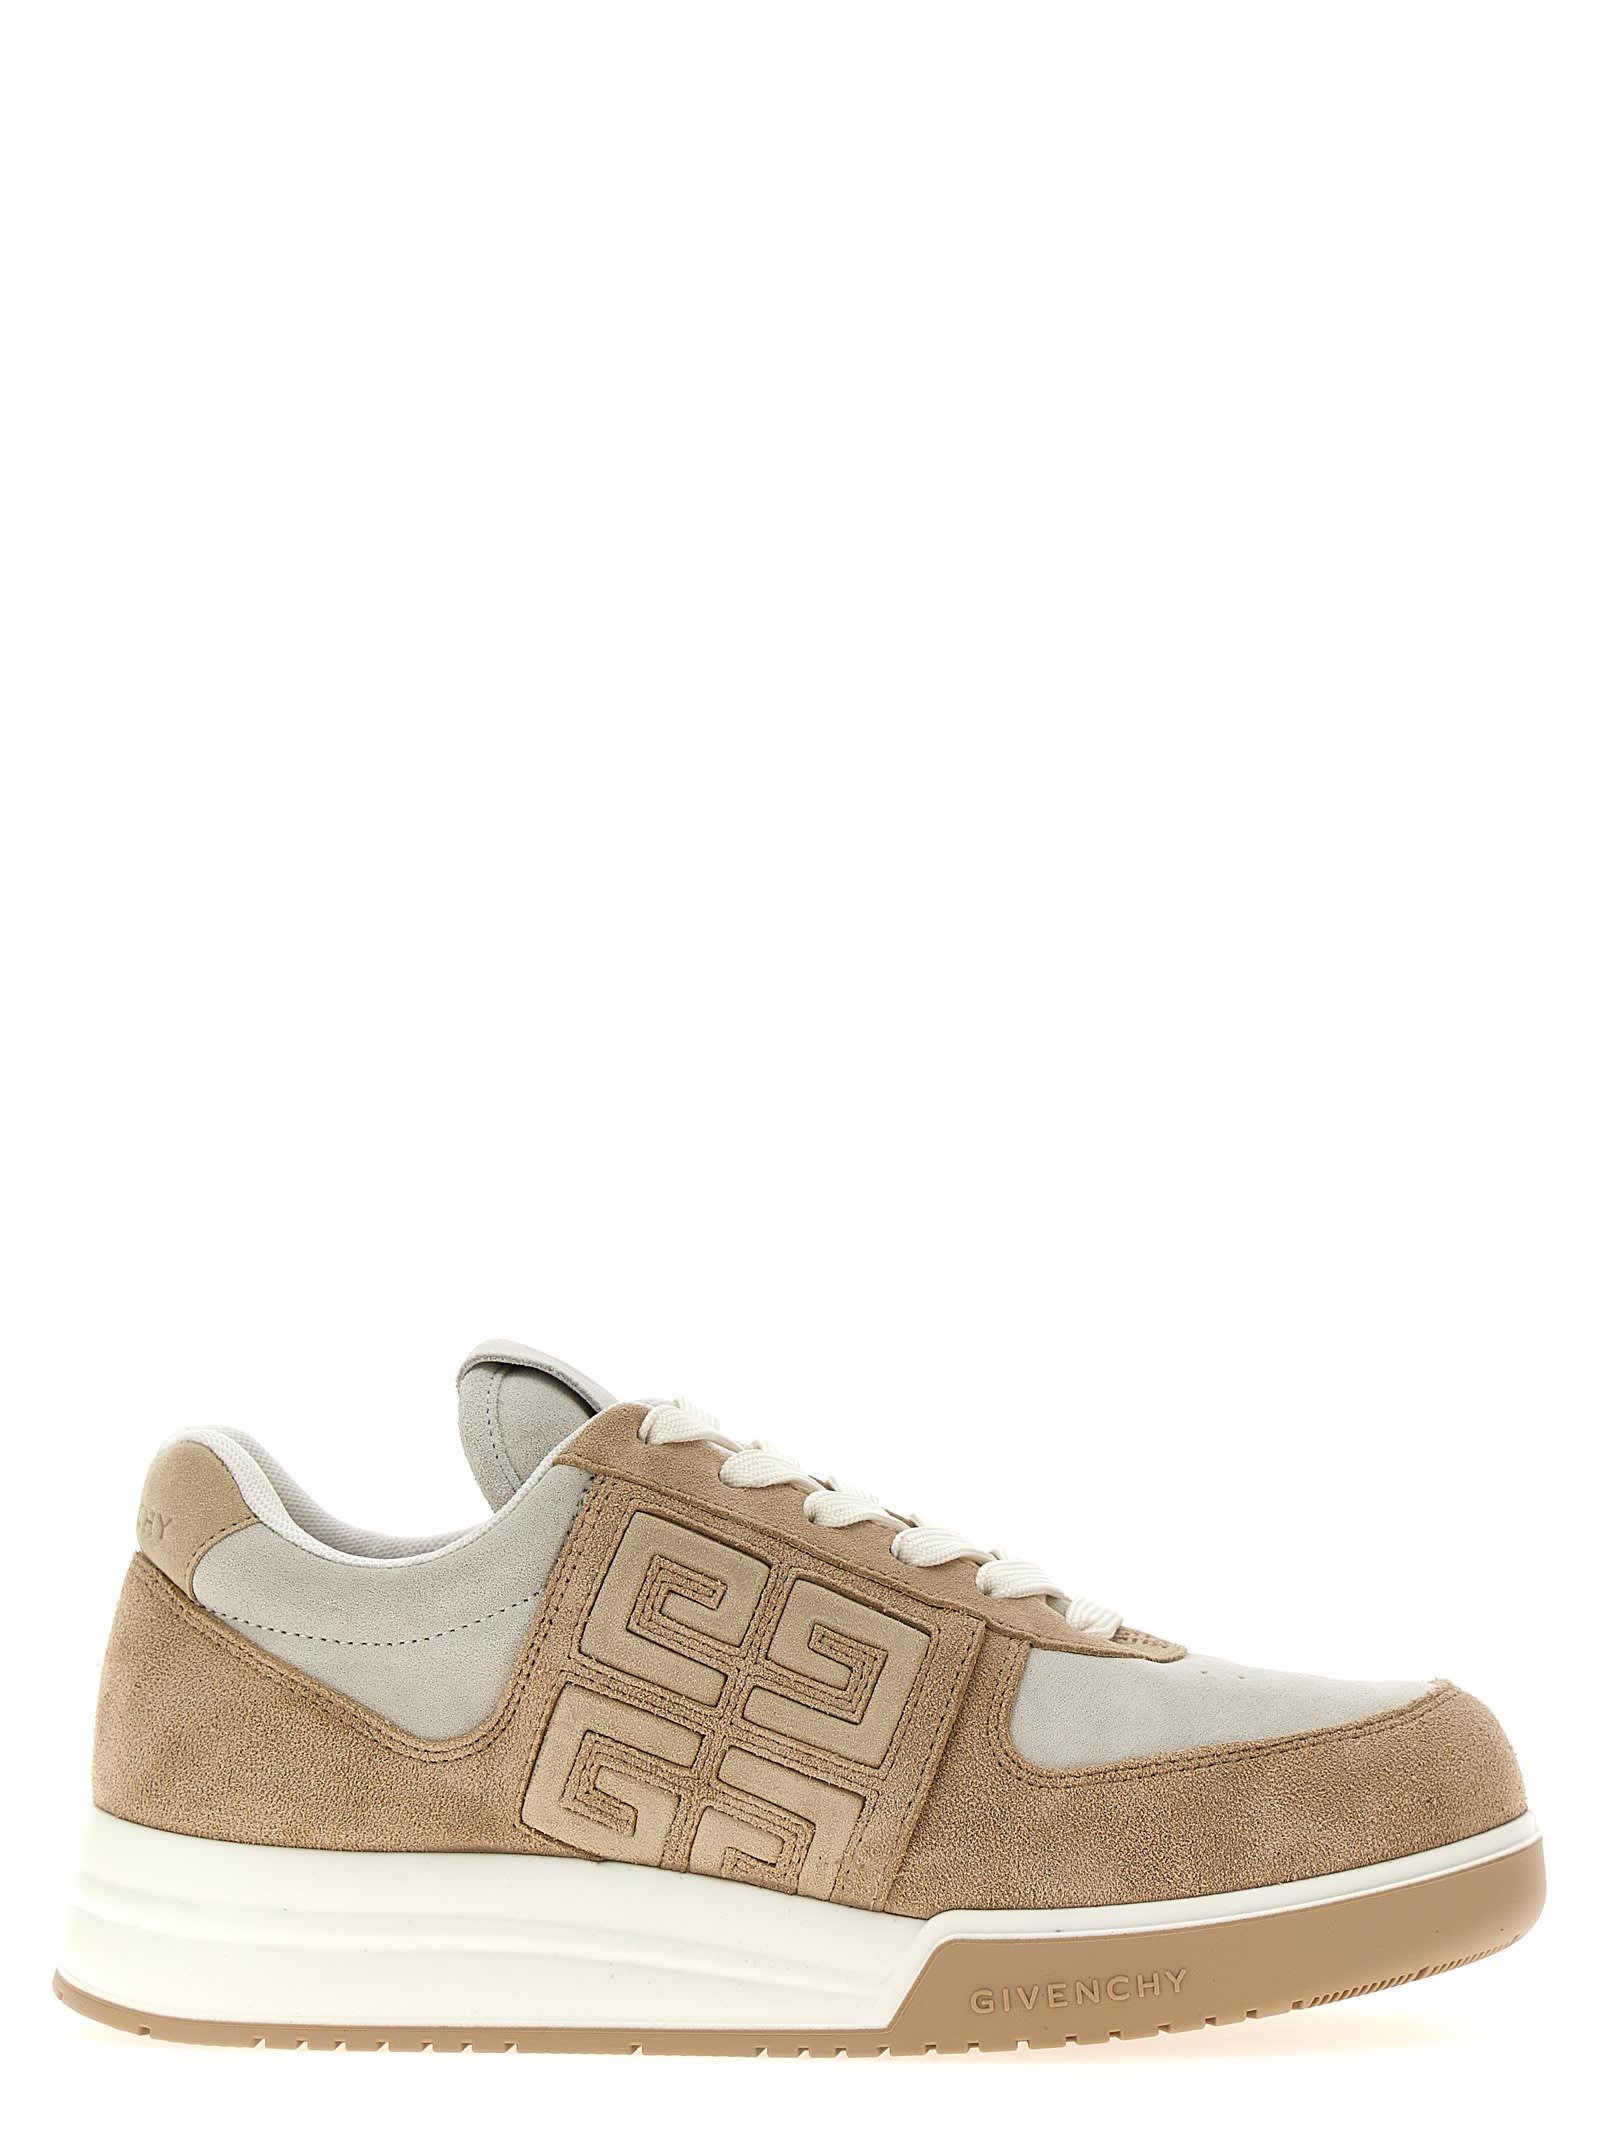 Givenchy G4 Trainers In White